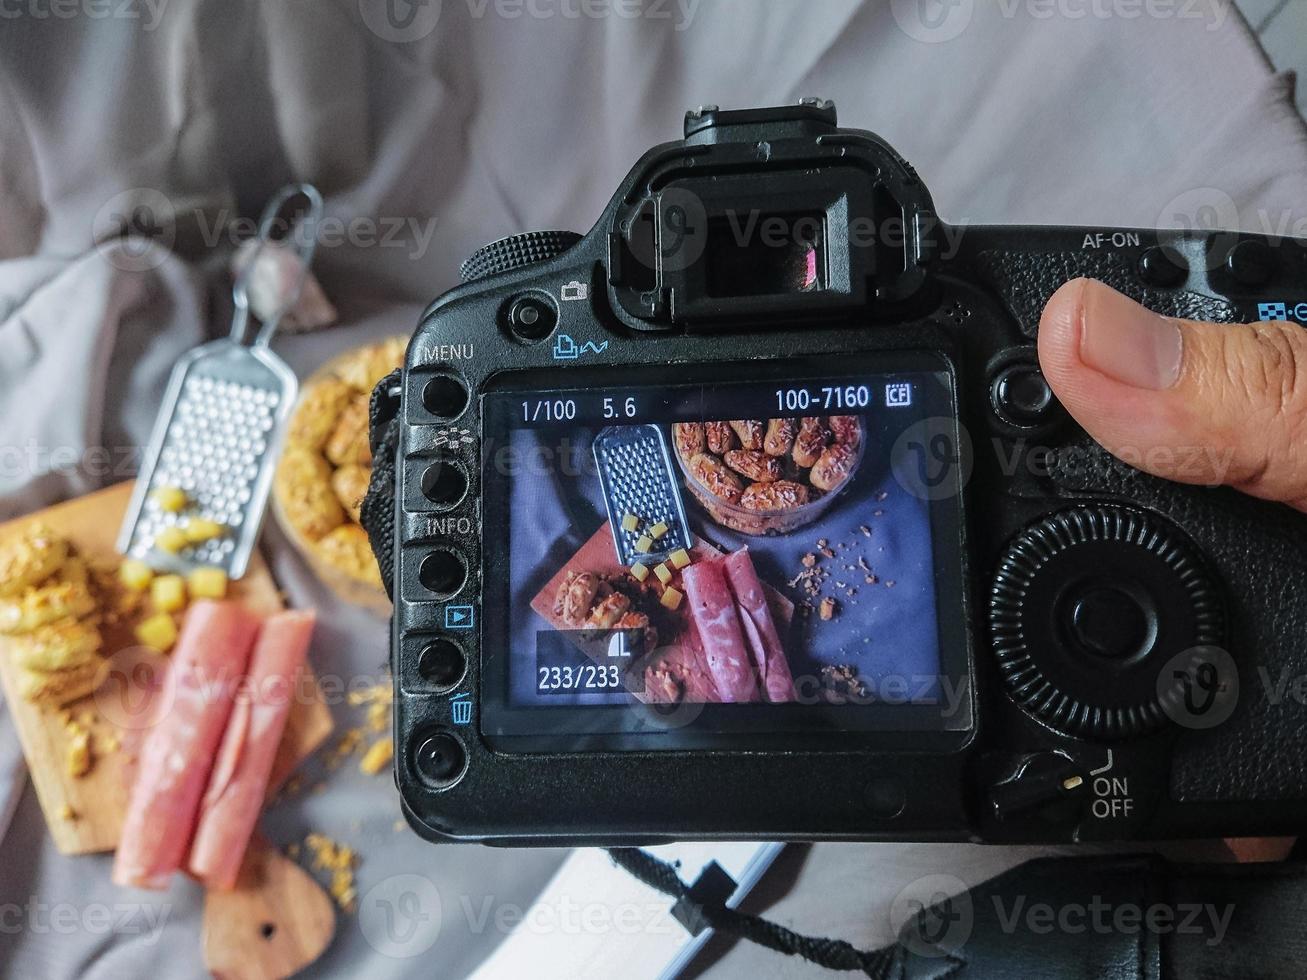 Behind the scene of food photography, photo shot with DSLR camera with assorted cookies as object. Professional food photographer